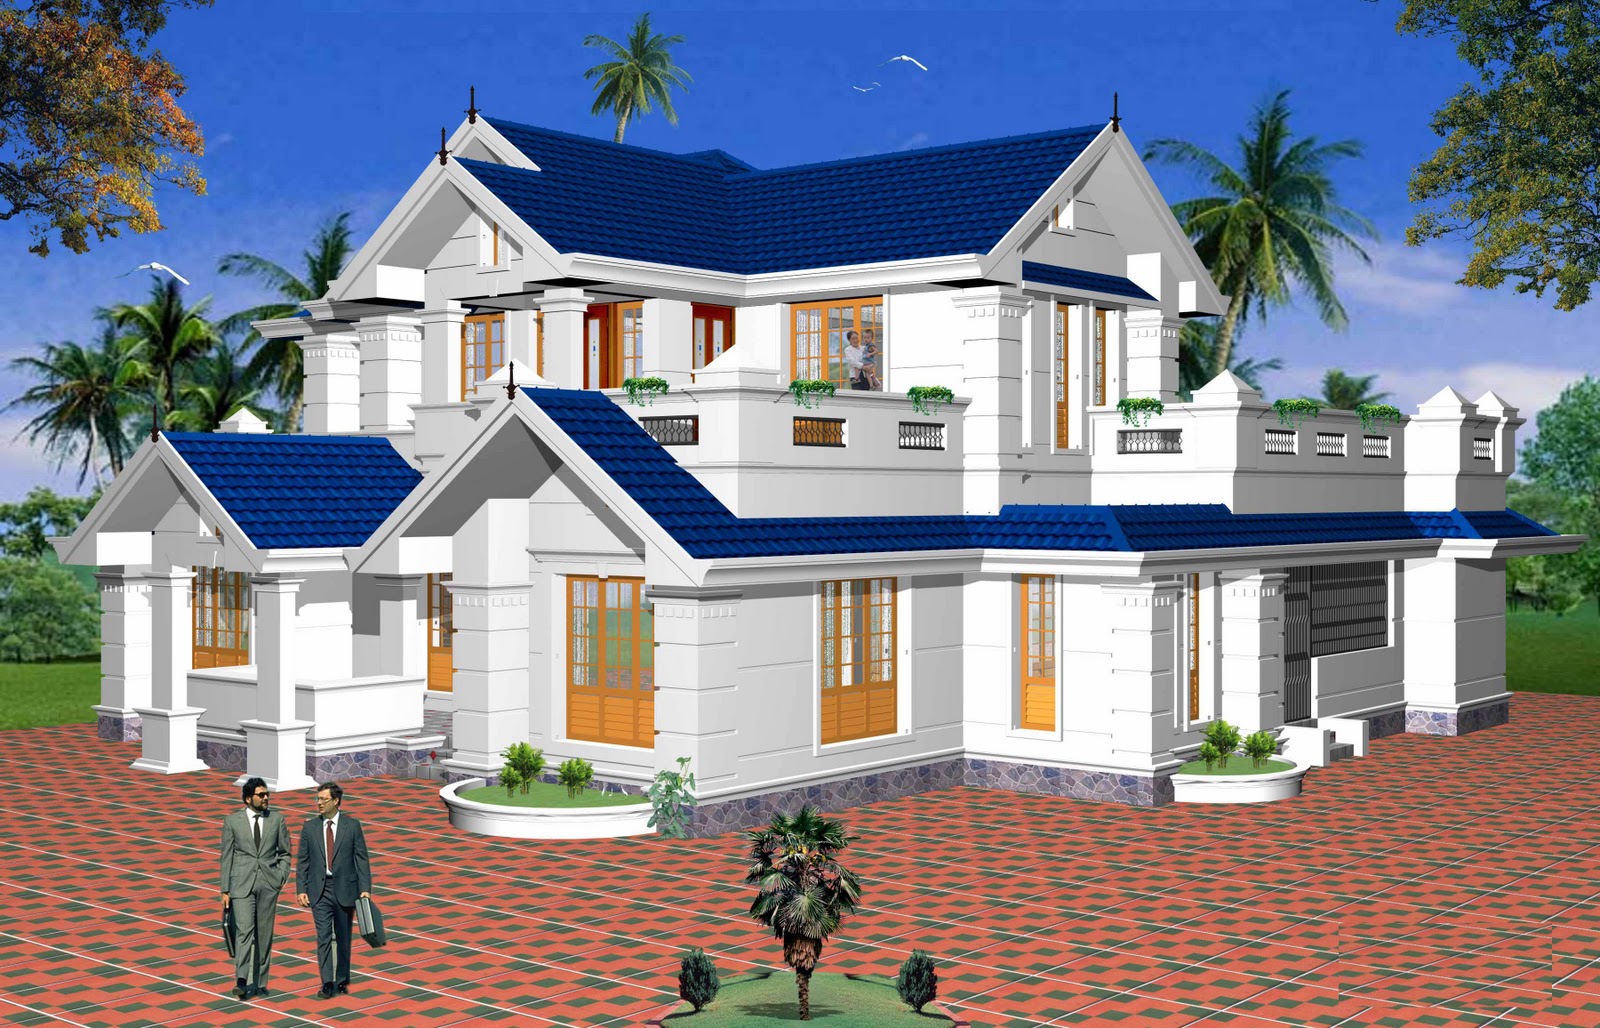 New home designs latest.: Beautiful latest modern home designs.